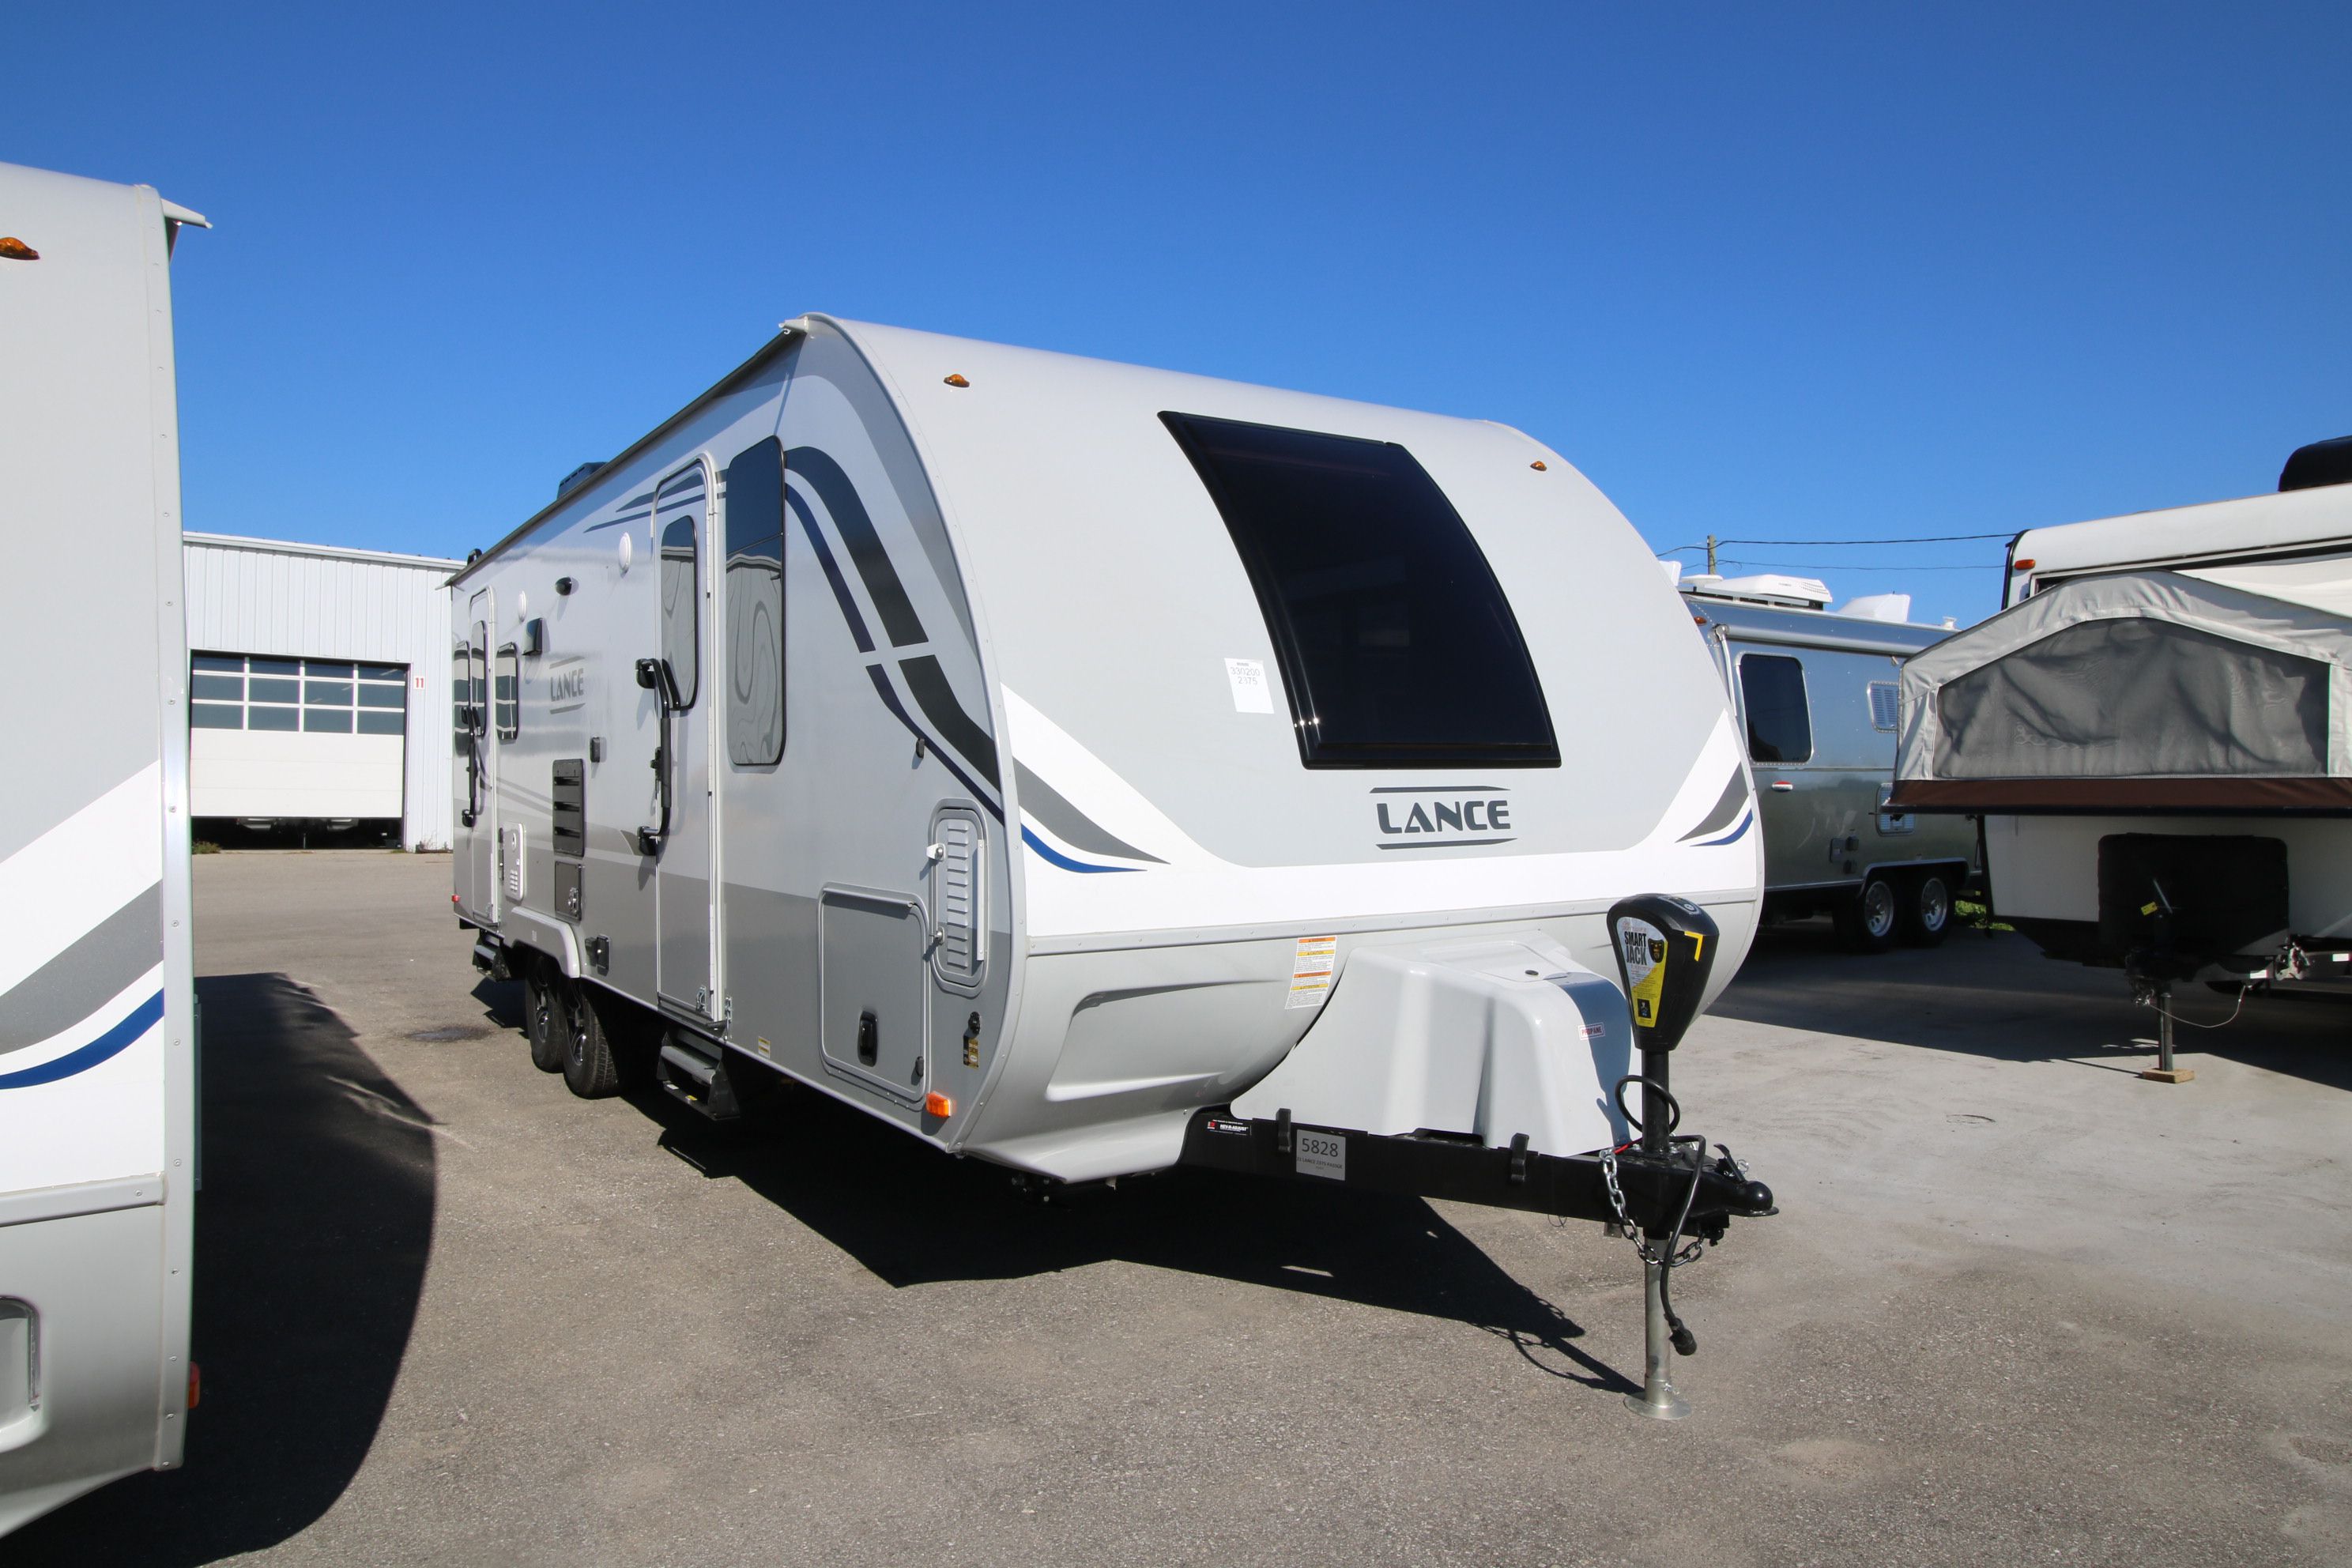 lance travel trailers for sale in canada